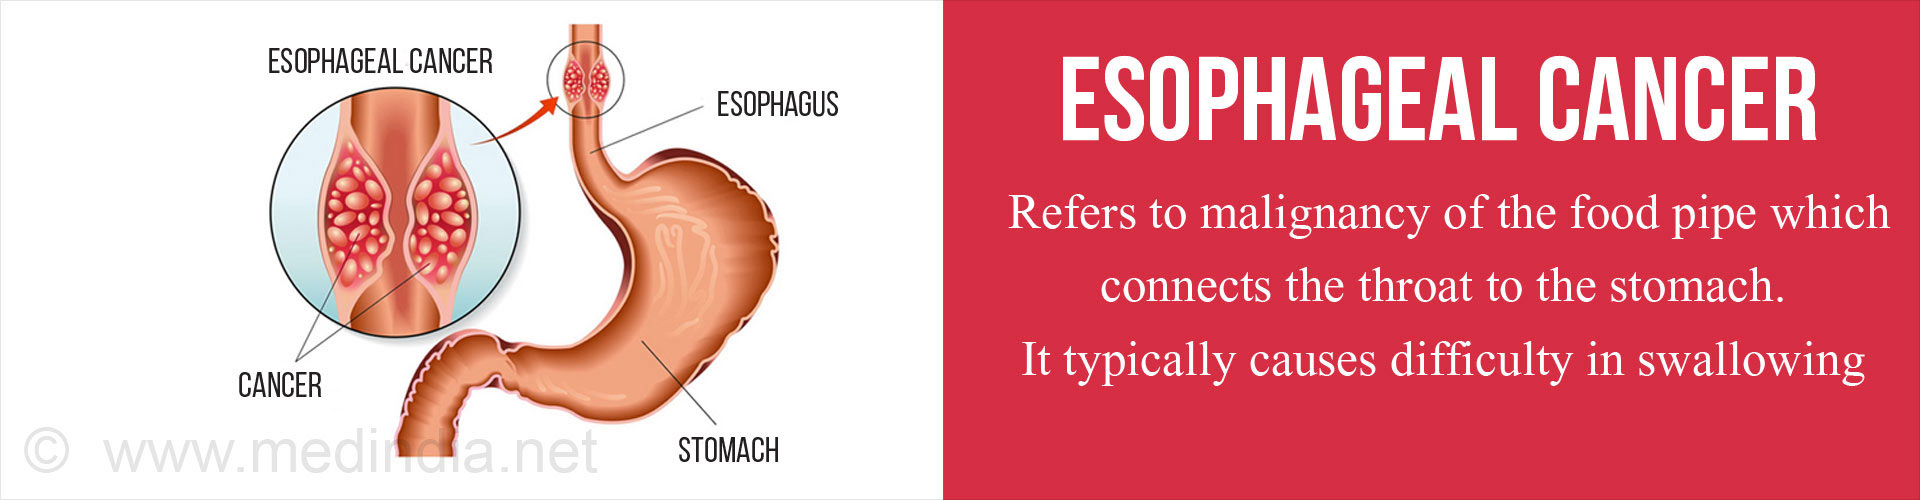 Esophageal cancer refers to malignancy of the food pipe which connects the throat to the stomach. It typically causes difficulty in swallowing